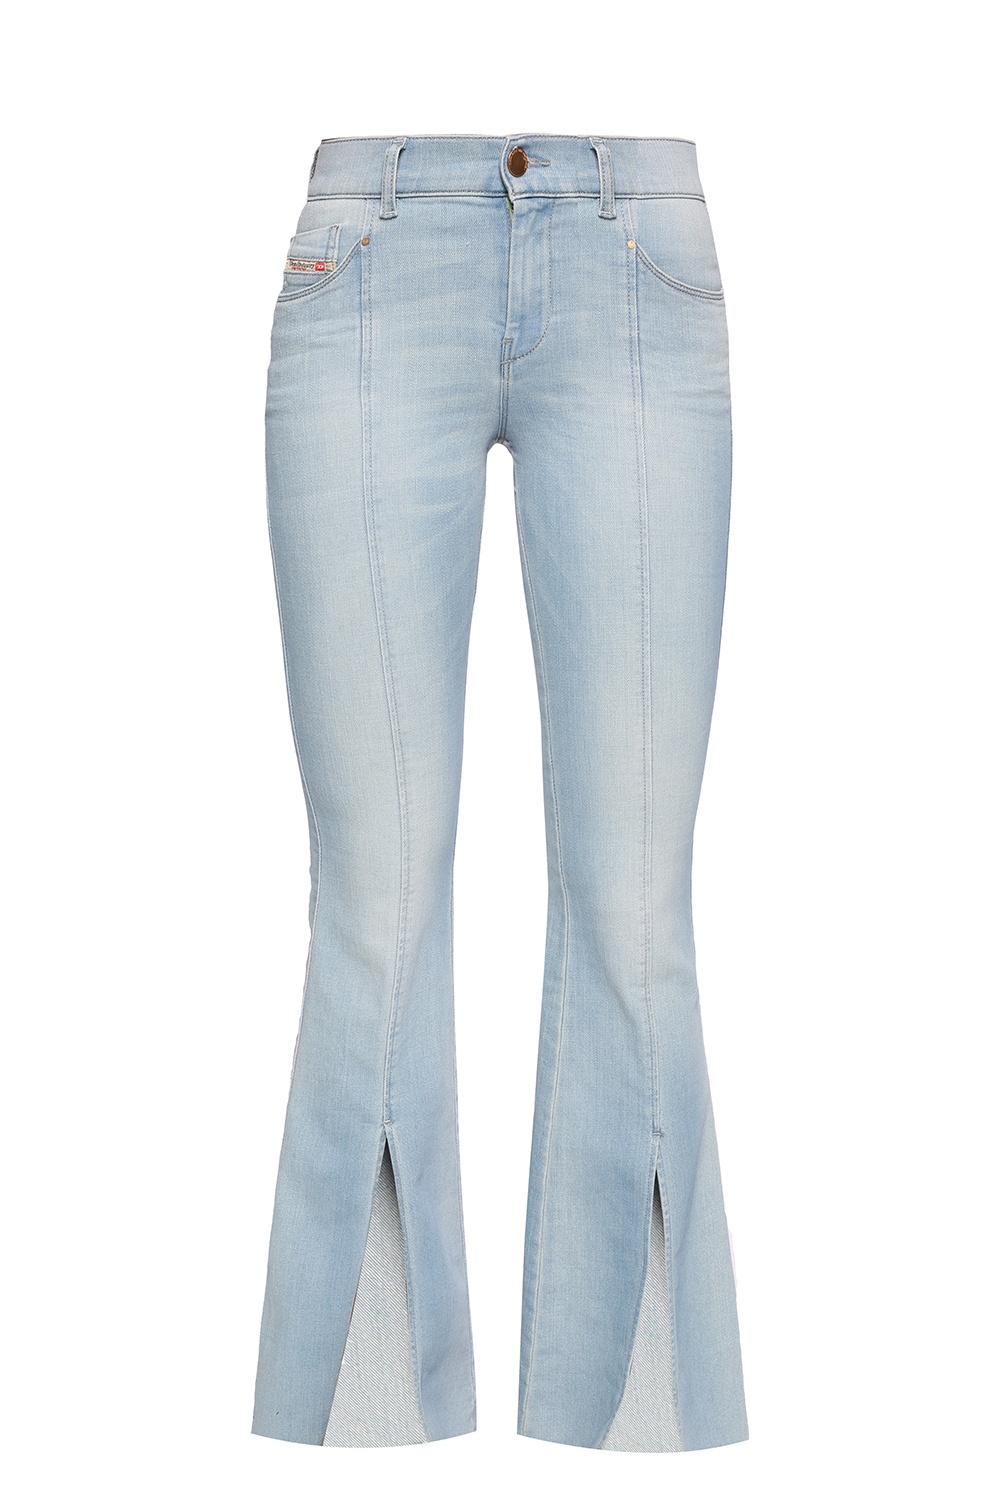 flared jeans canada